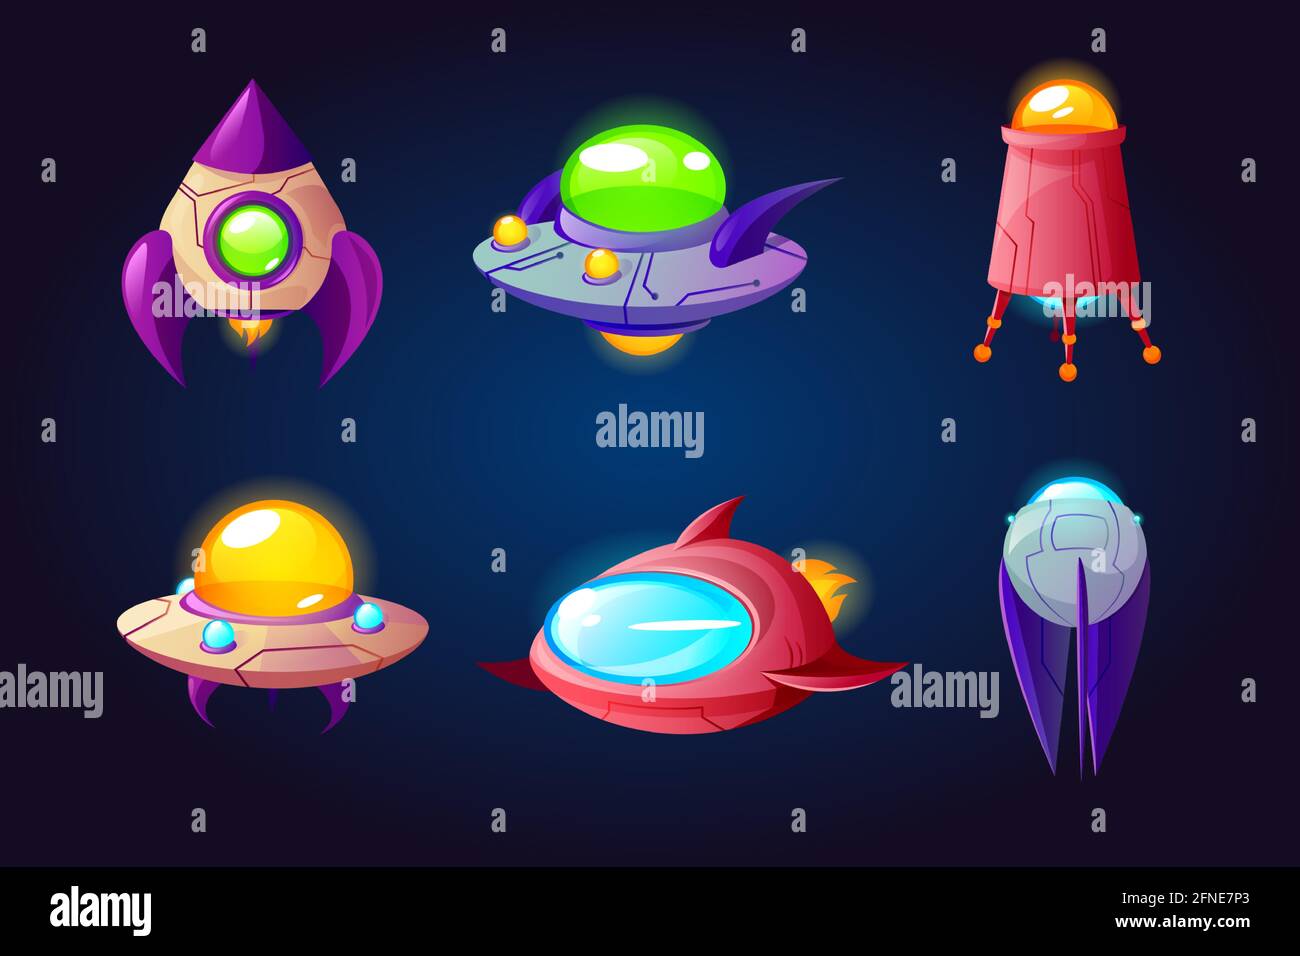 Alien space ships, ufo rockets, fantasy bizarre shuttles, computer game graphic design elements, cosmic collection of funny spaceships isolated on blue background, Cartoon vector illustration set Stock Vector